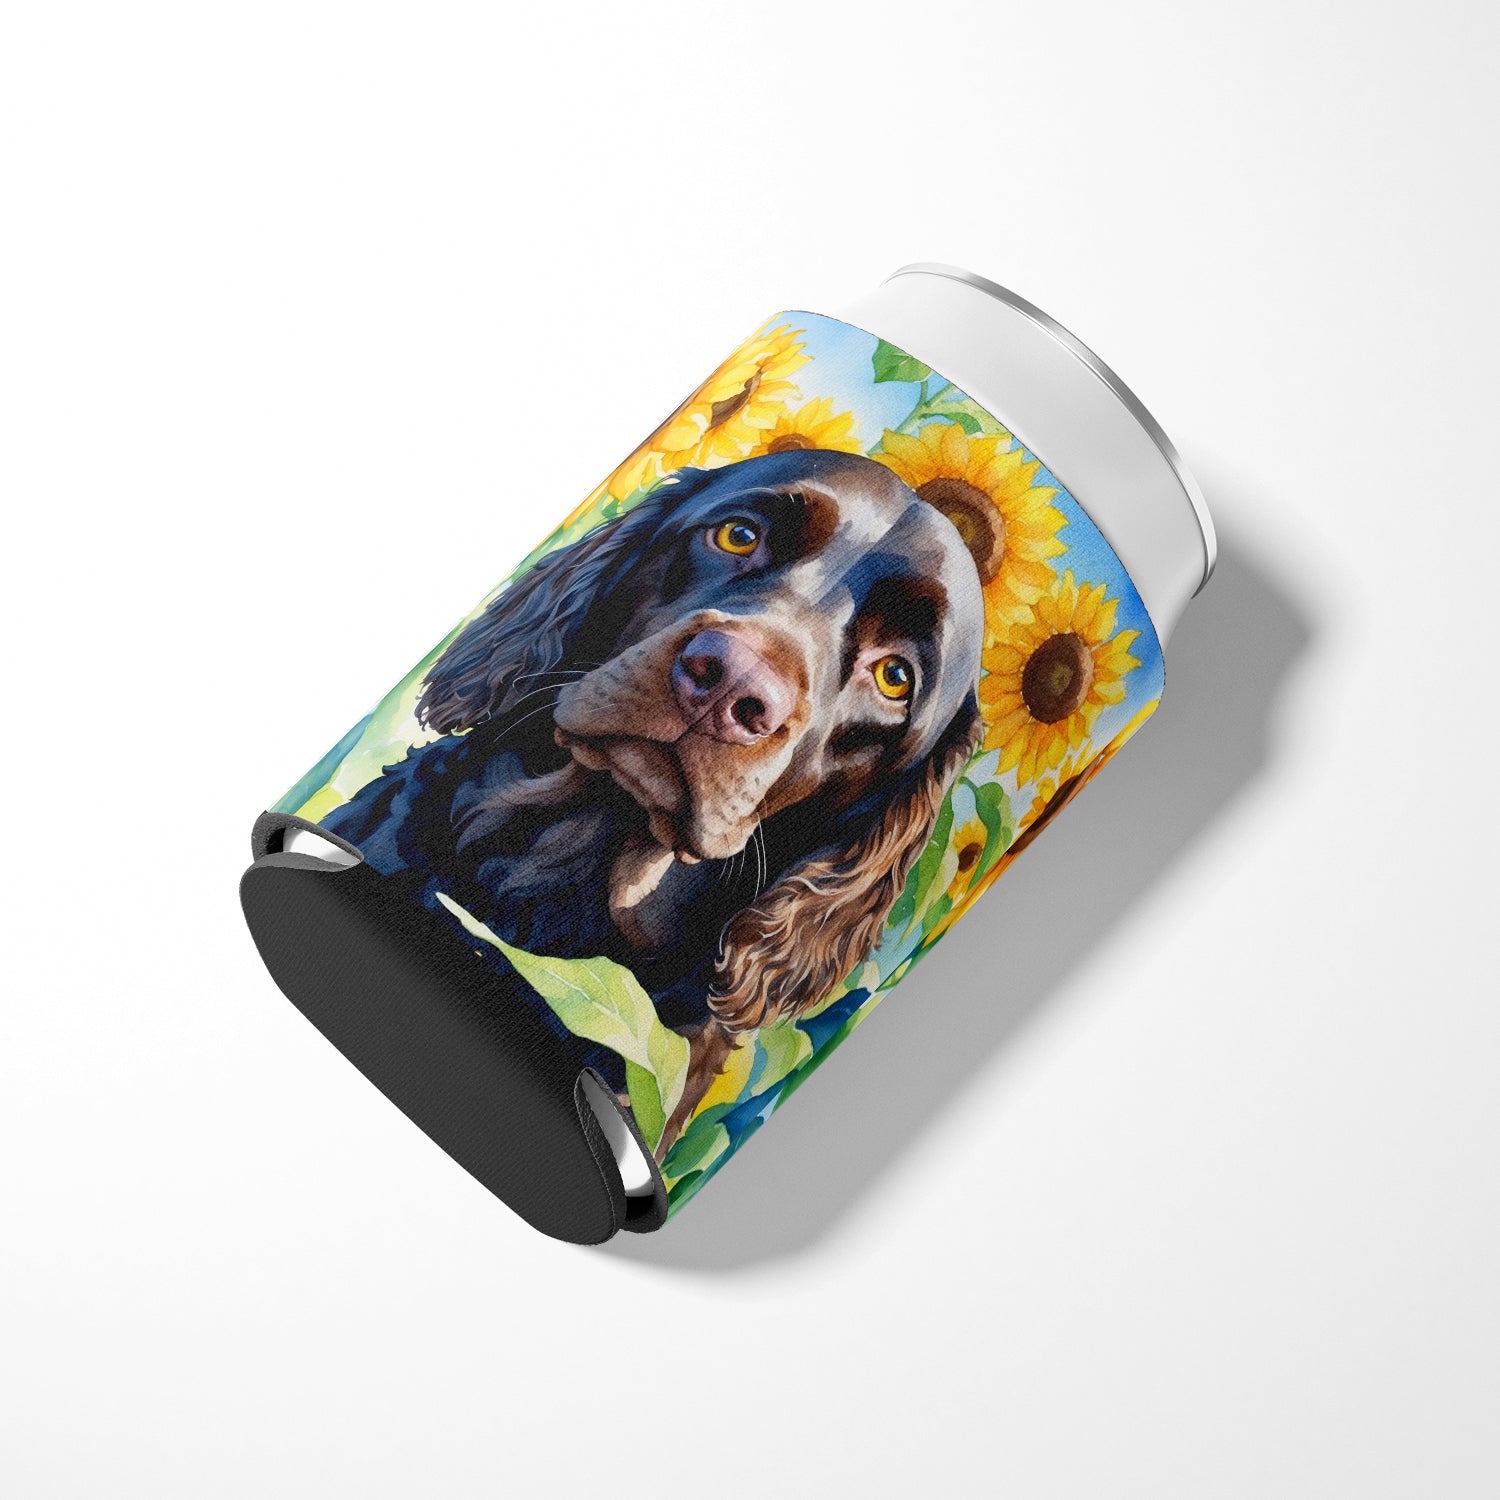 American Water Spaniel in Sunflowers Can or Bottle Hugger